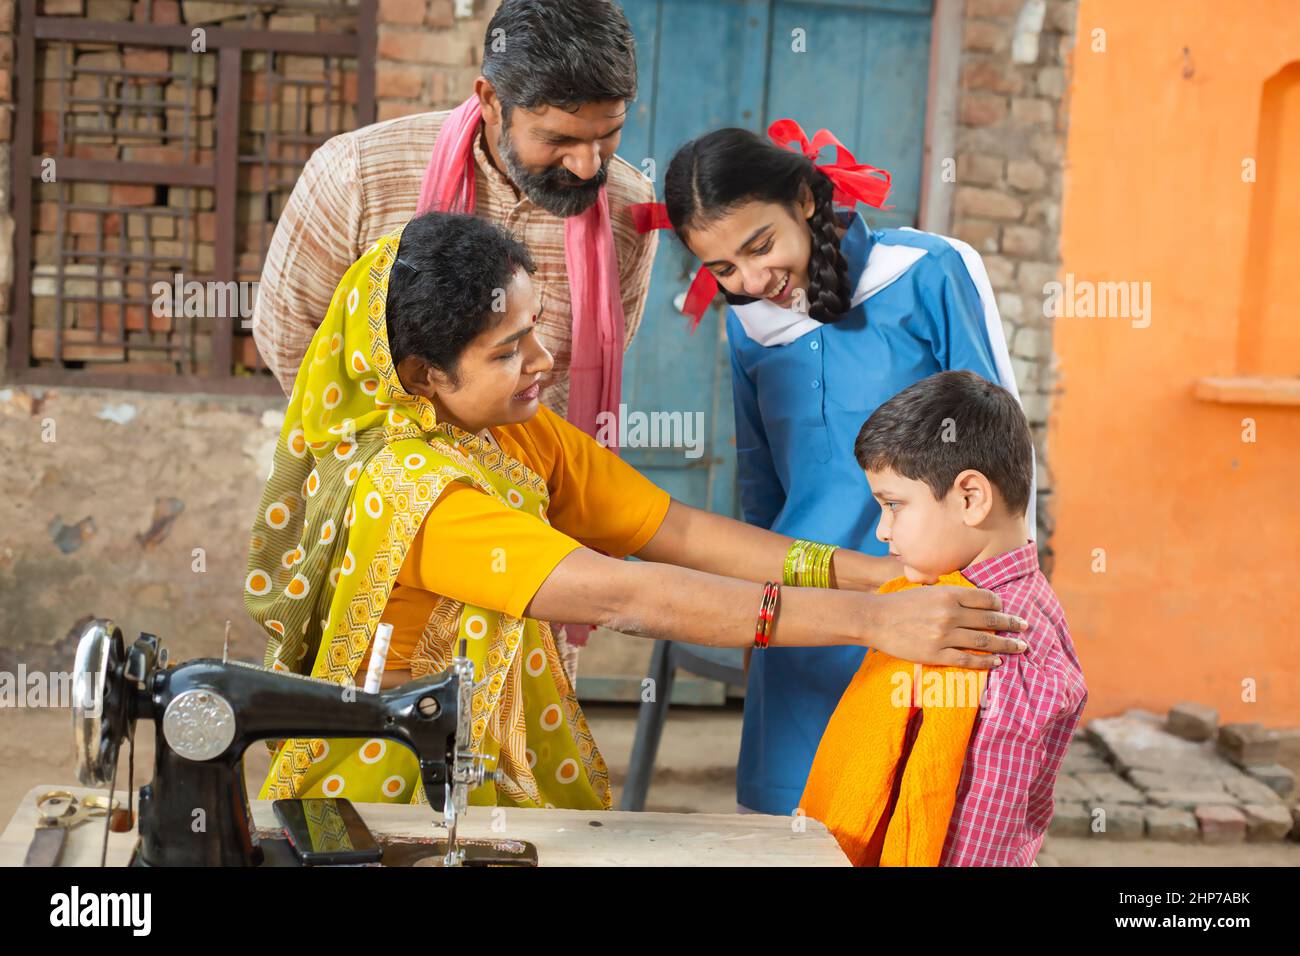 Indian mother check cloths size on her son while husband and daughter looks at him, sewing cloths on sewing machine. Small family, lifestyle. Stock Photo